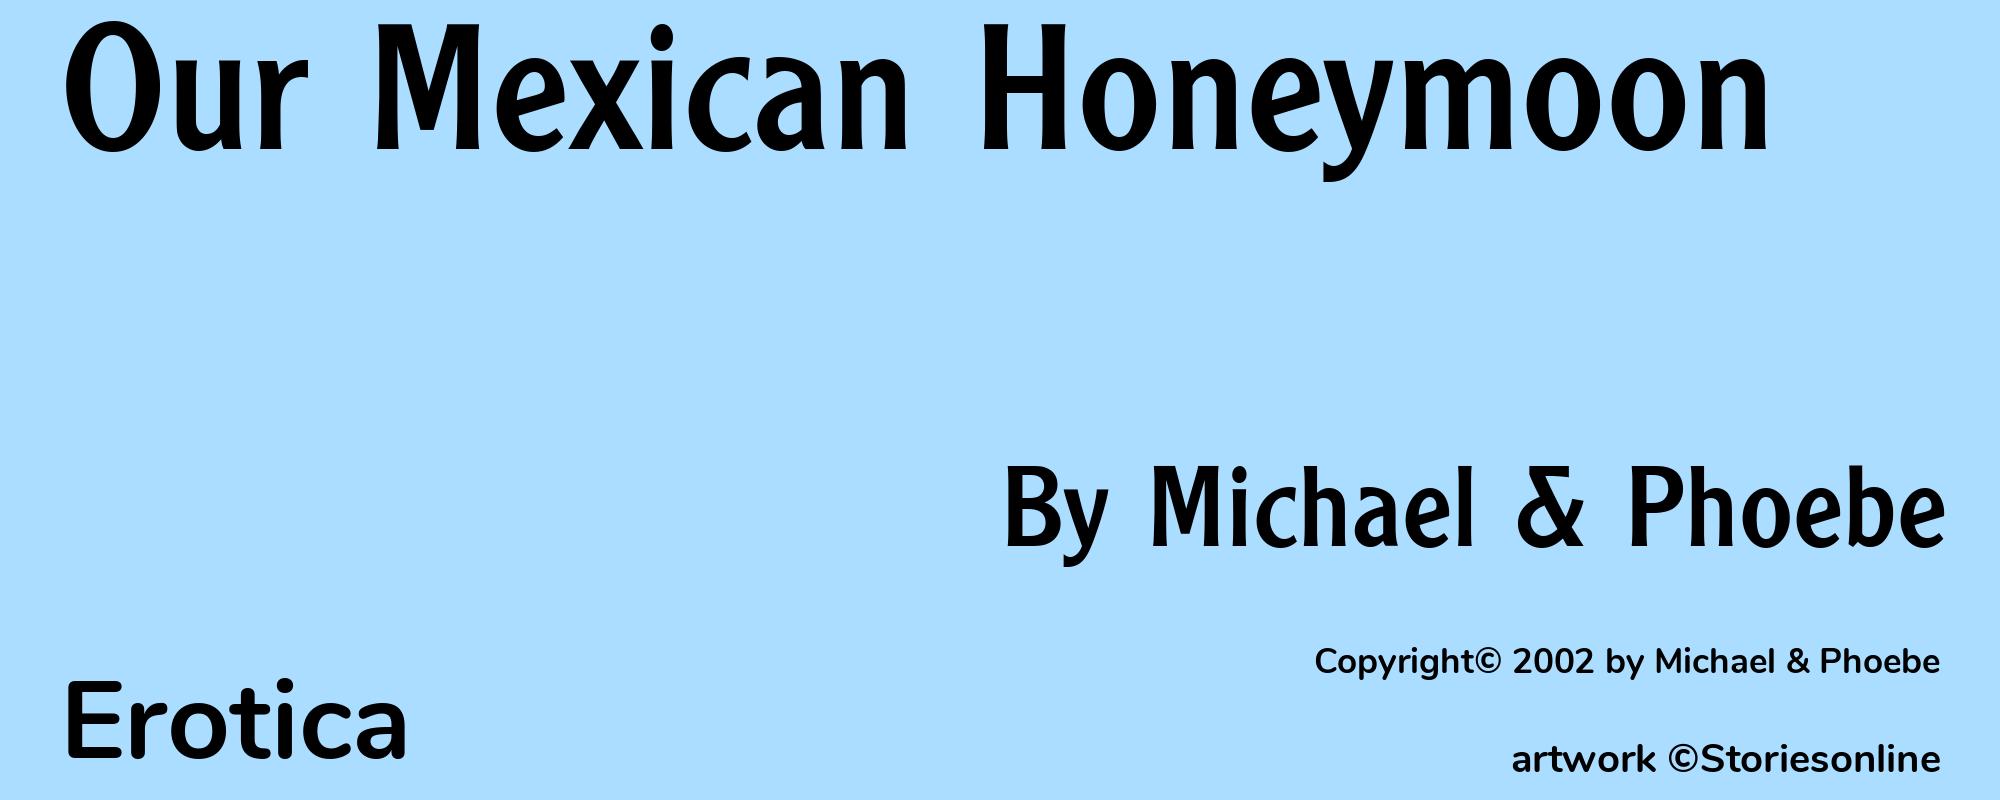 Our Mexican Honeymoon - Cover